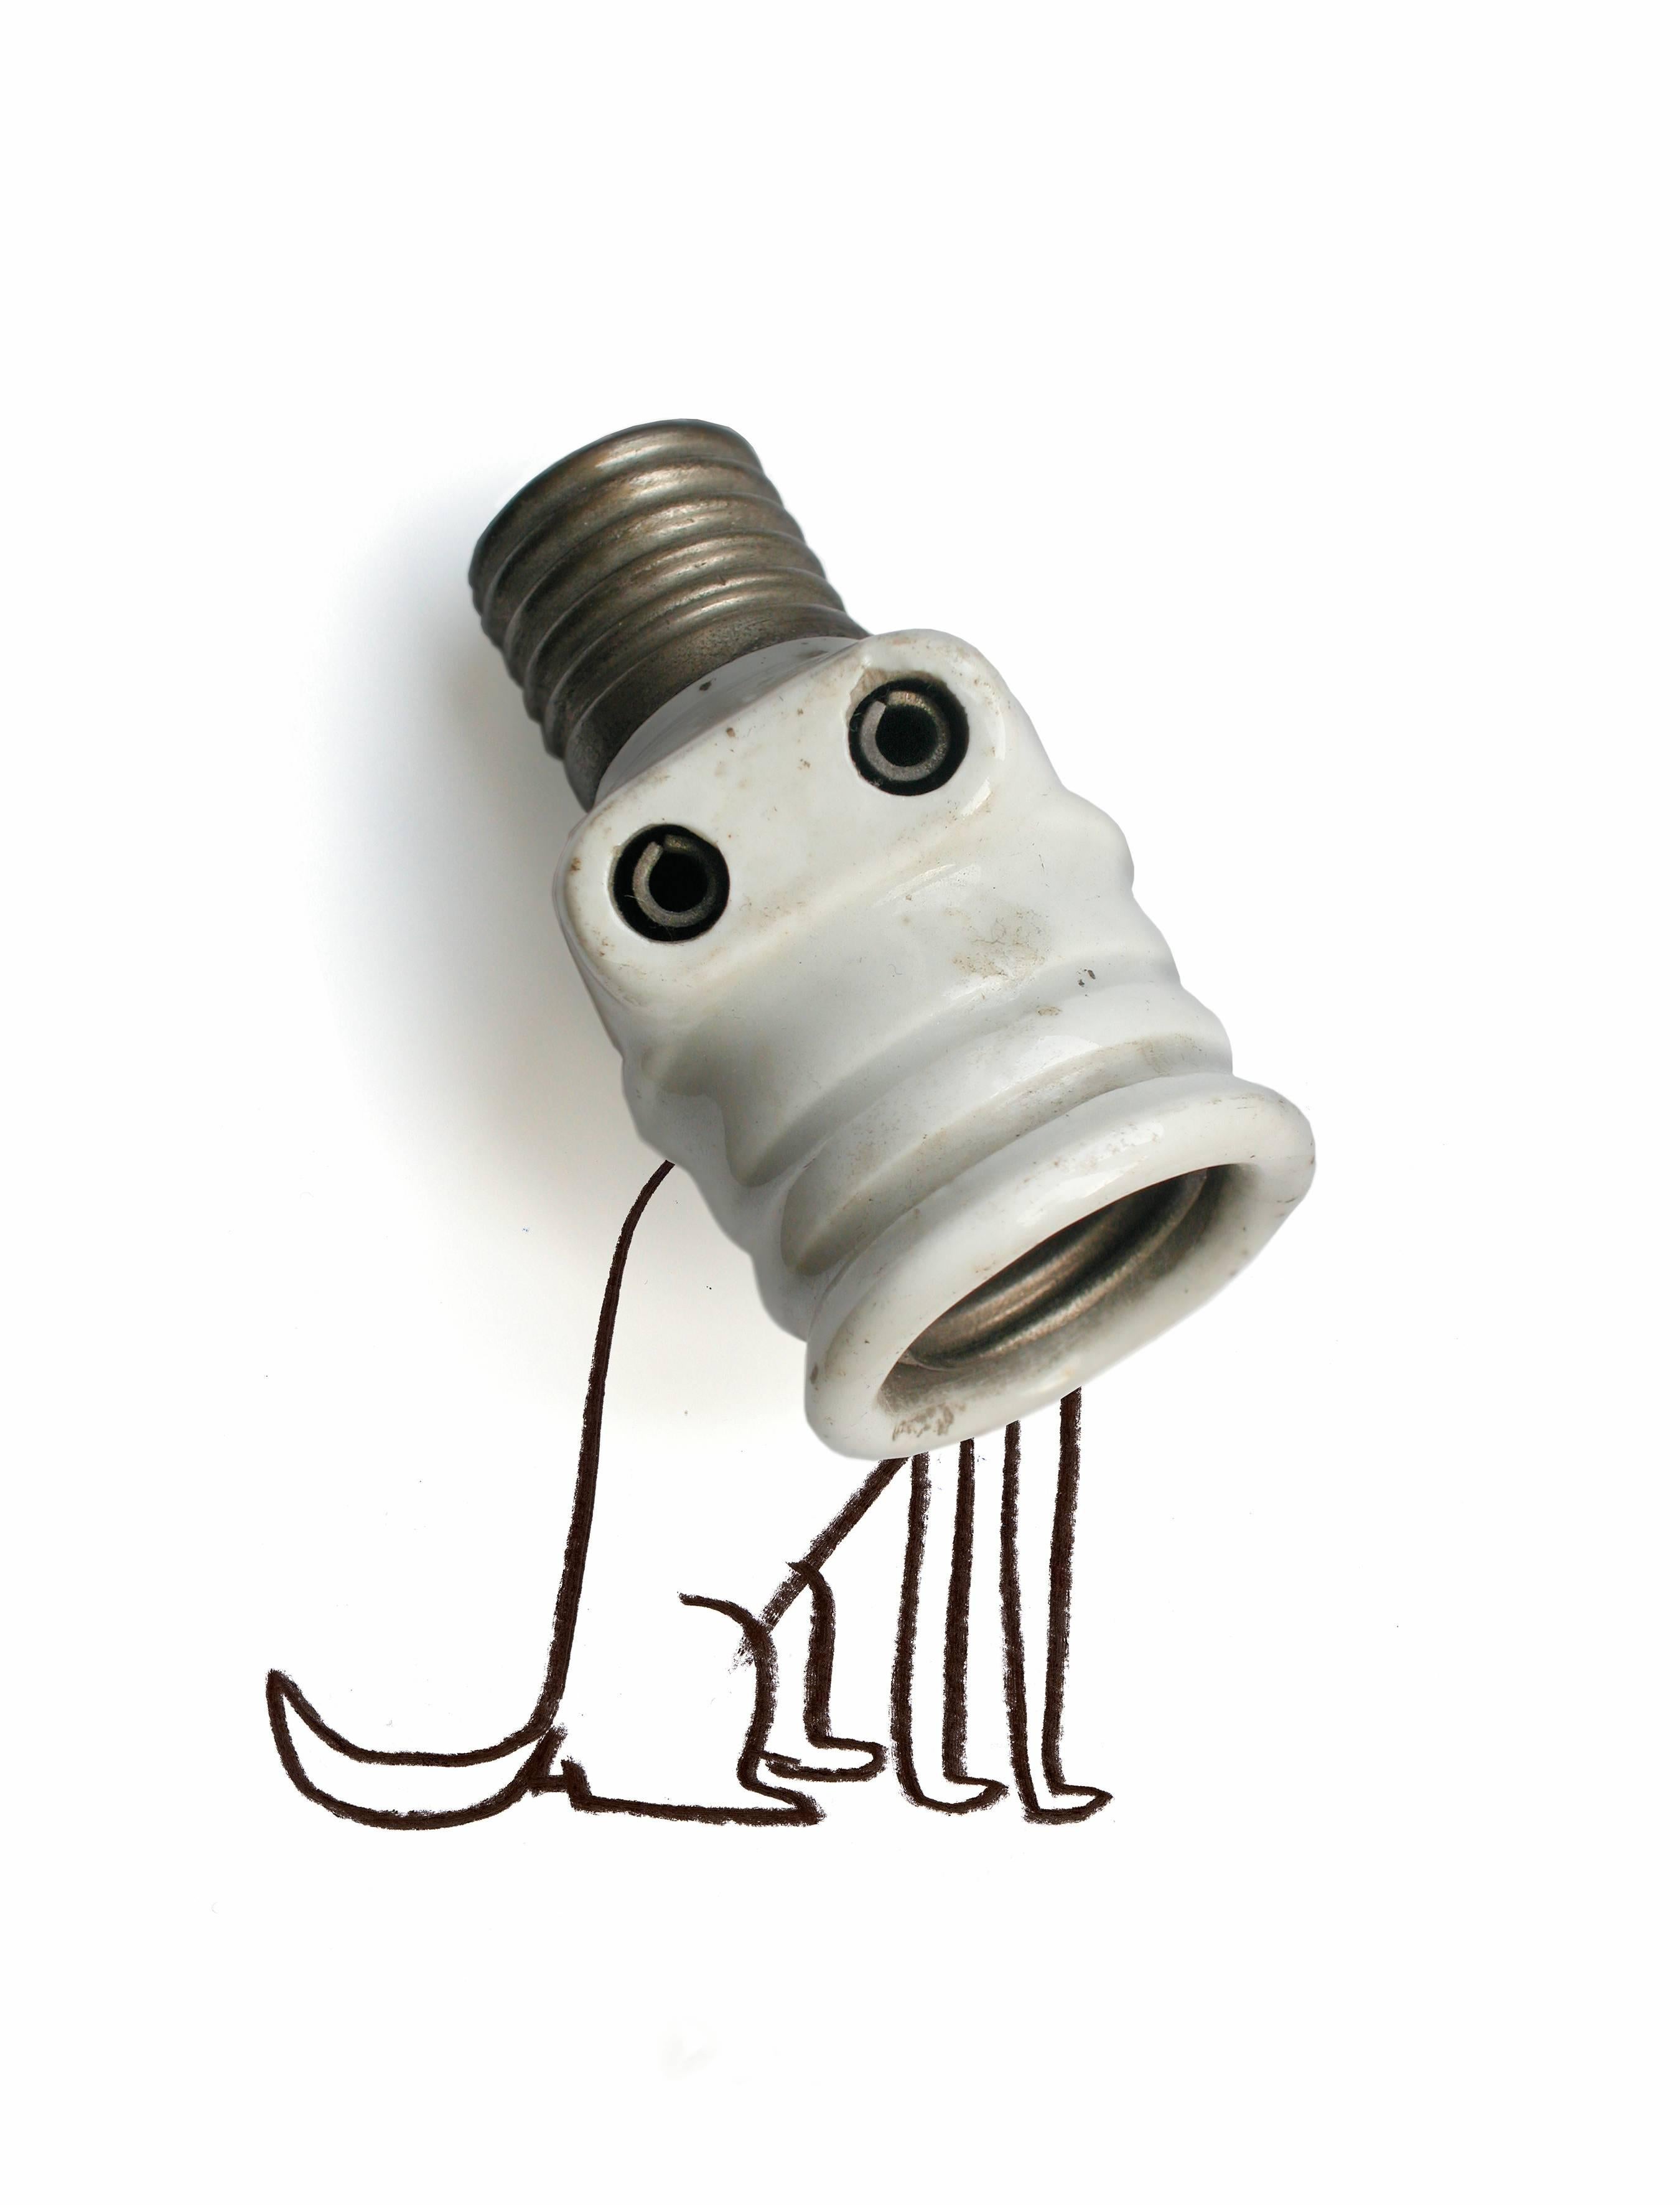 Serge Bloch Animal Print - funny drawing of dog with light bulb nose, good doggy